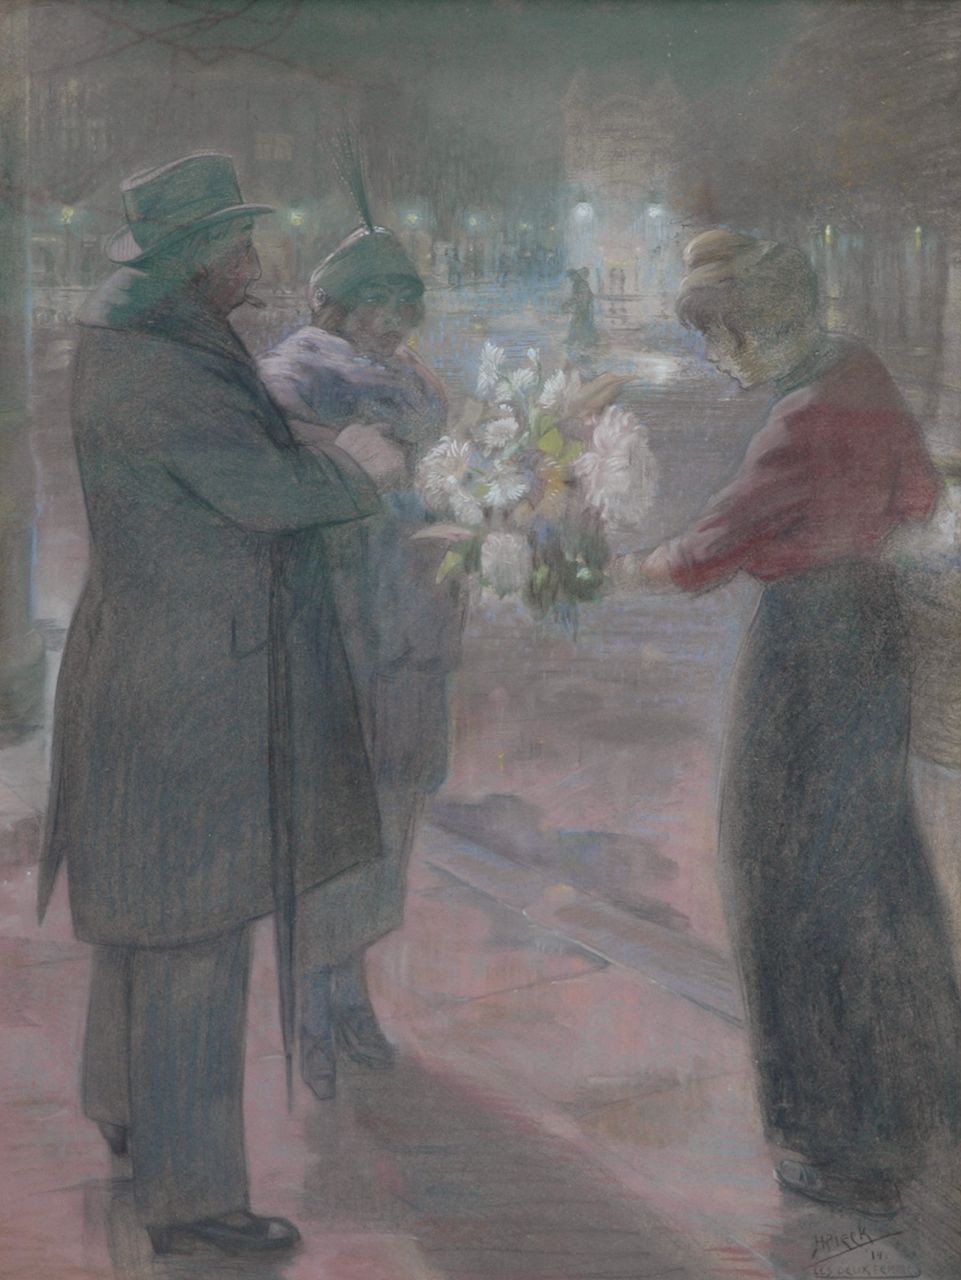 Pieck H.C.  | 'Henri' Christiaan Pieck, The beautiful flower seller, pastel on paper 118.0 x 90.0 cm, signed l.r. and dated '14